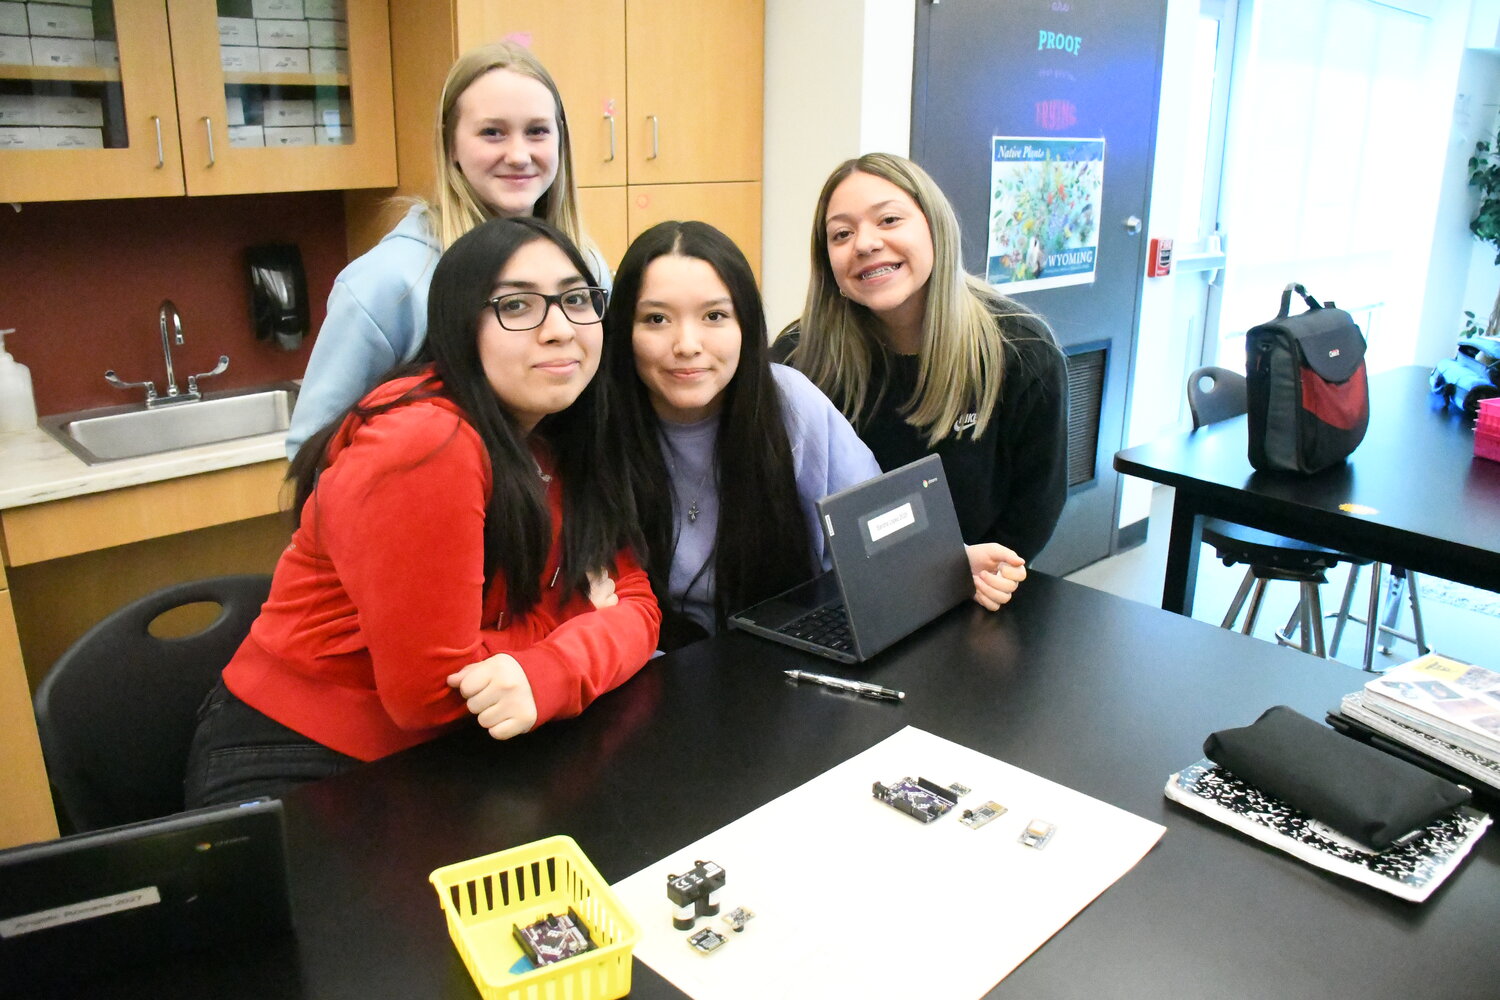 “I wasn’t really into this stuff [STEM] before, but doing this with TechRise has opened my mind into wanting to look into it more,” said Sofia Zarate. Posing with the class’s rocket-powered lander components are: Raegan Roetker, Angelic Romero, Sandra Lopez and Sofia Zarate.